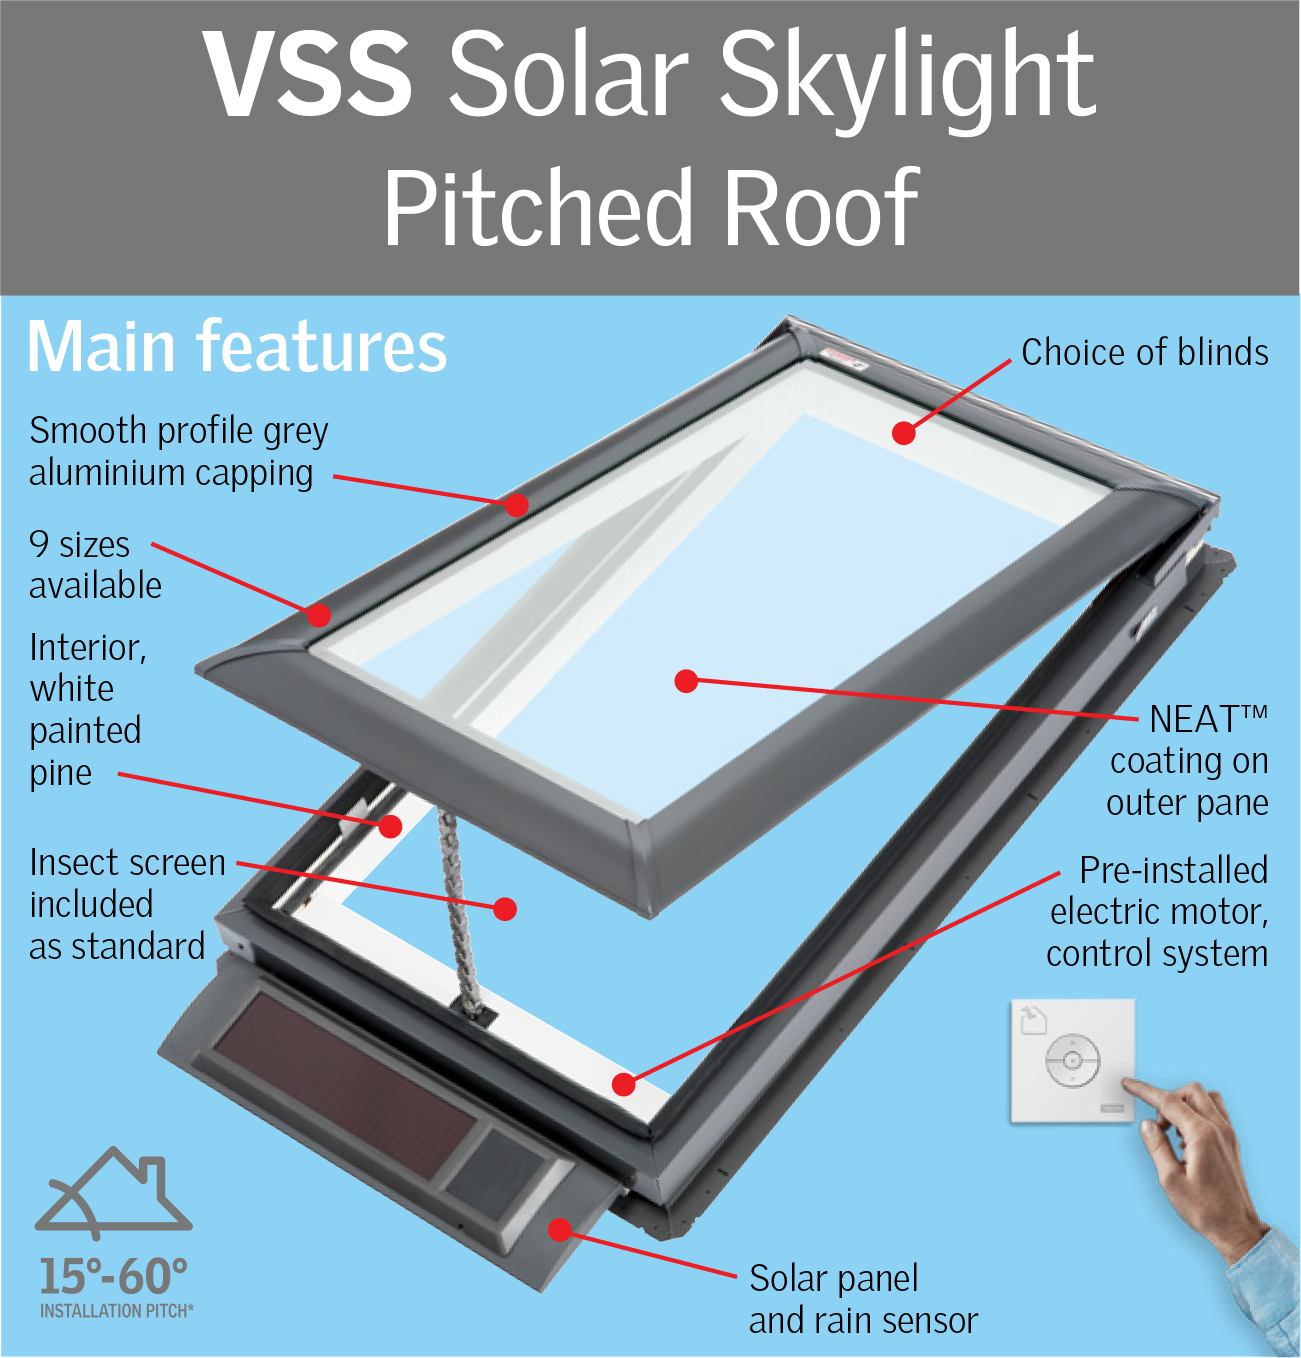 VSS Solar-Skylight Pitched Roof